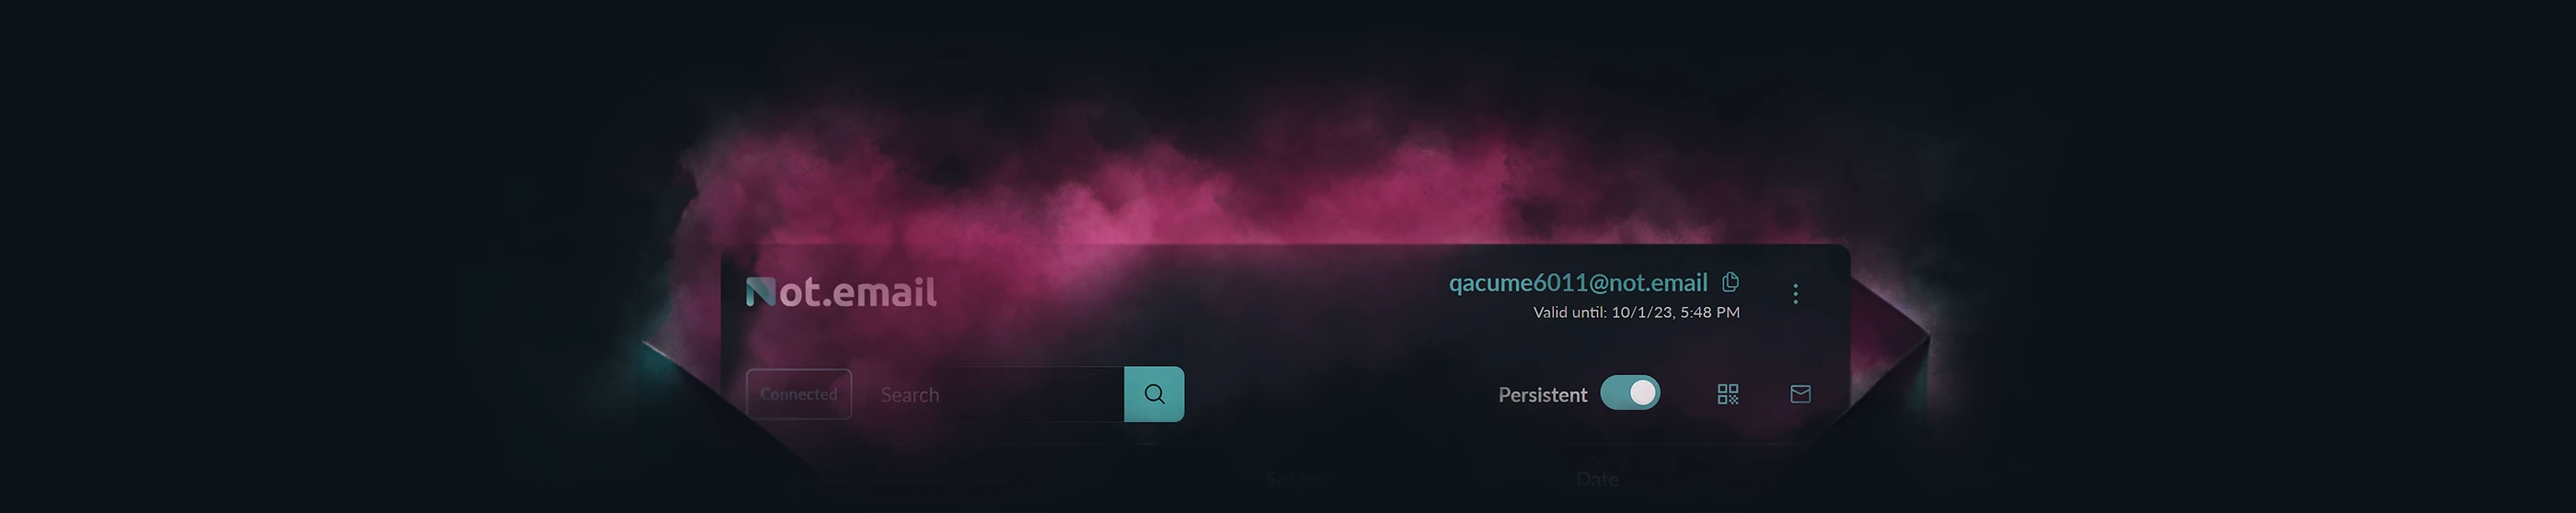 Elevated snapshot of Not.email's user interface, enveloped in wisps of magenta and teal smoke, symbolizing the seamless blend of design and security.